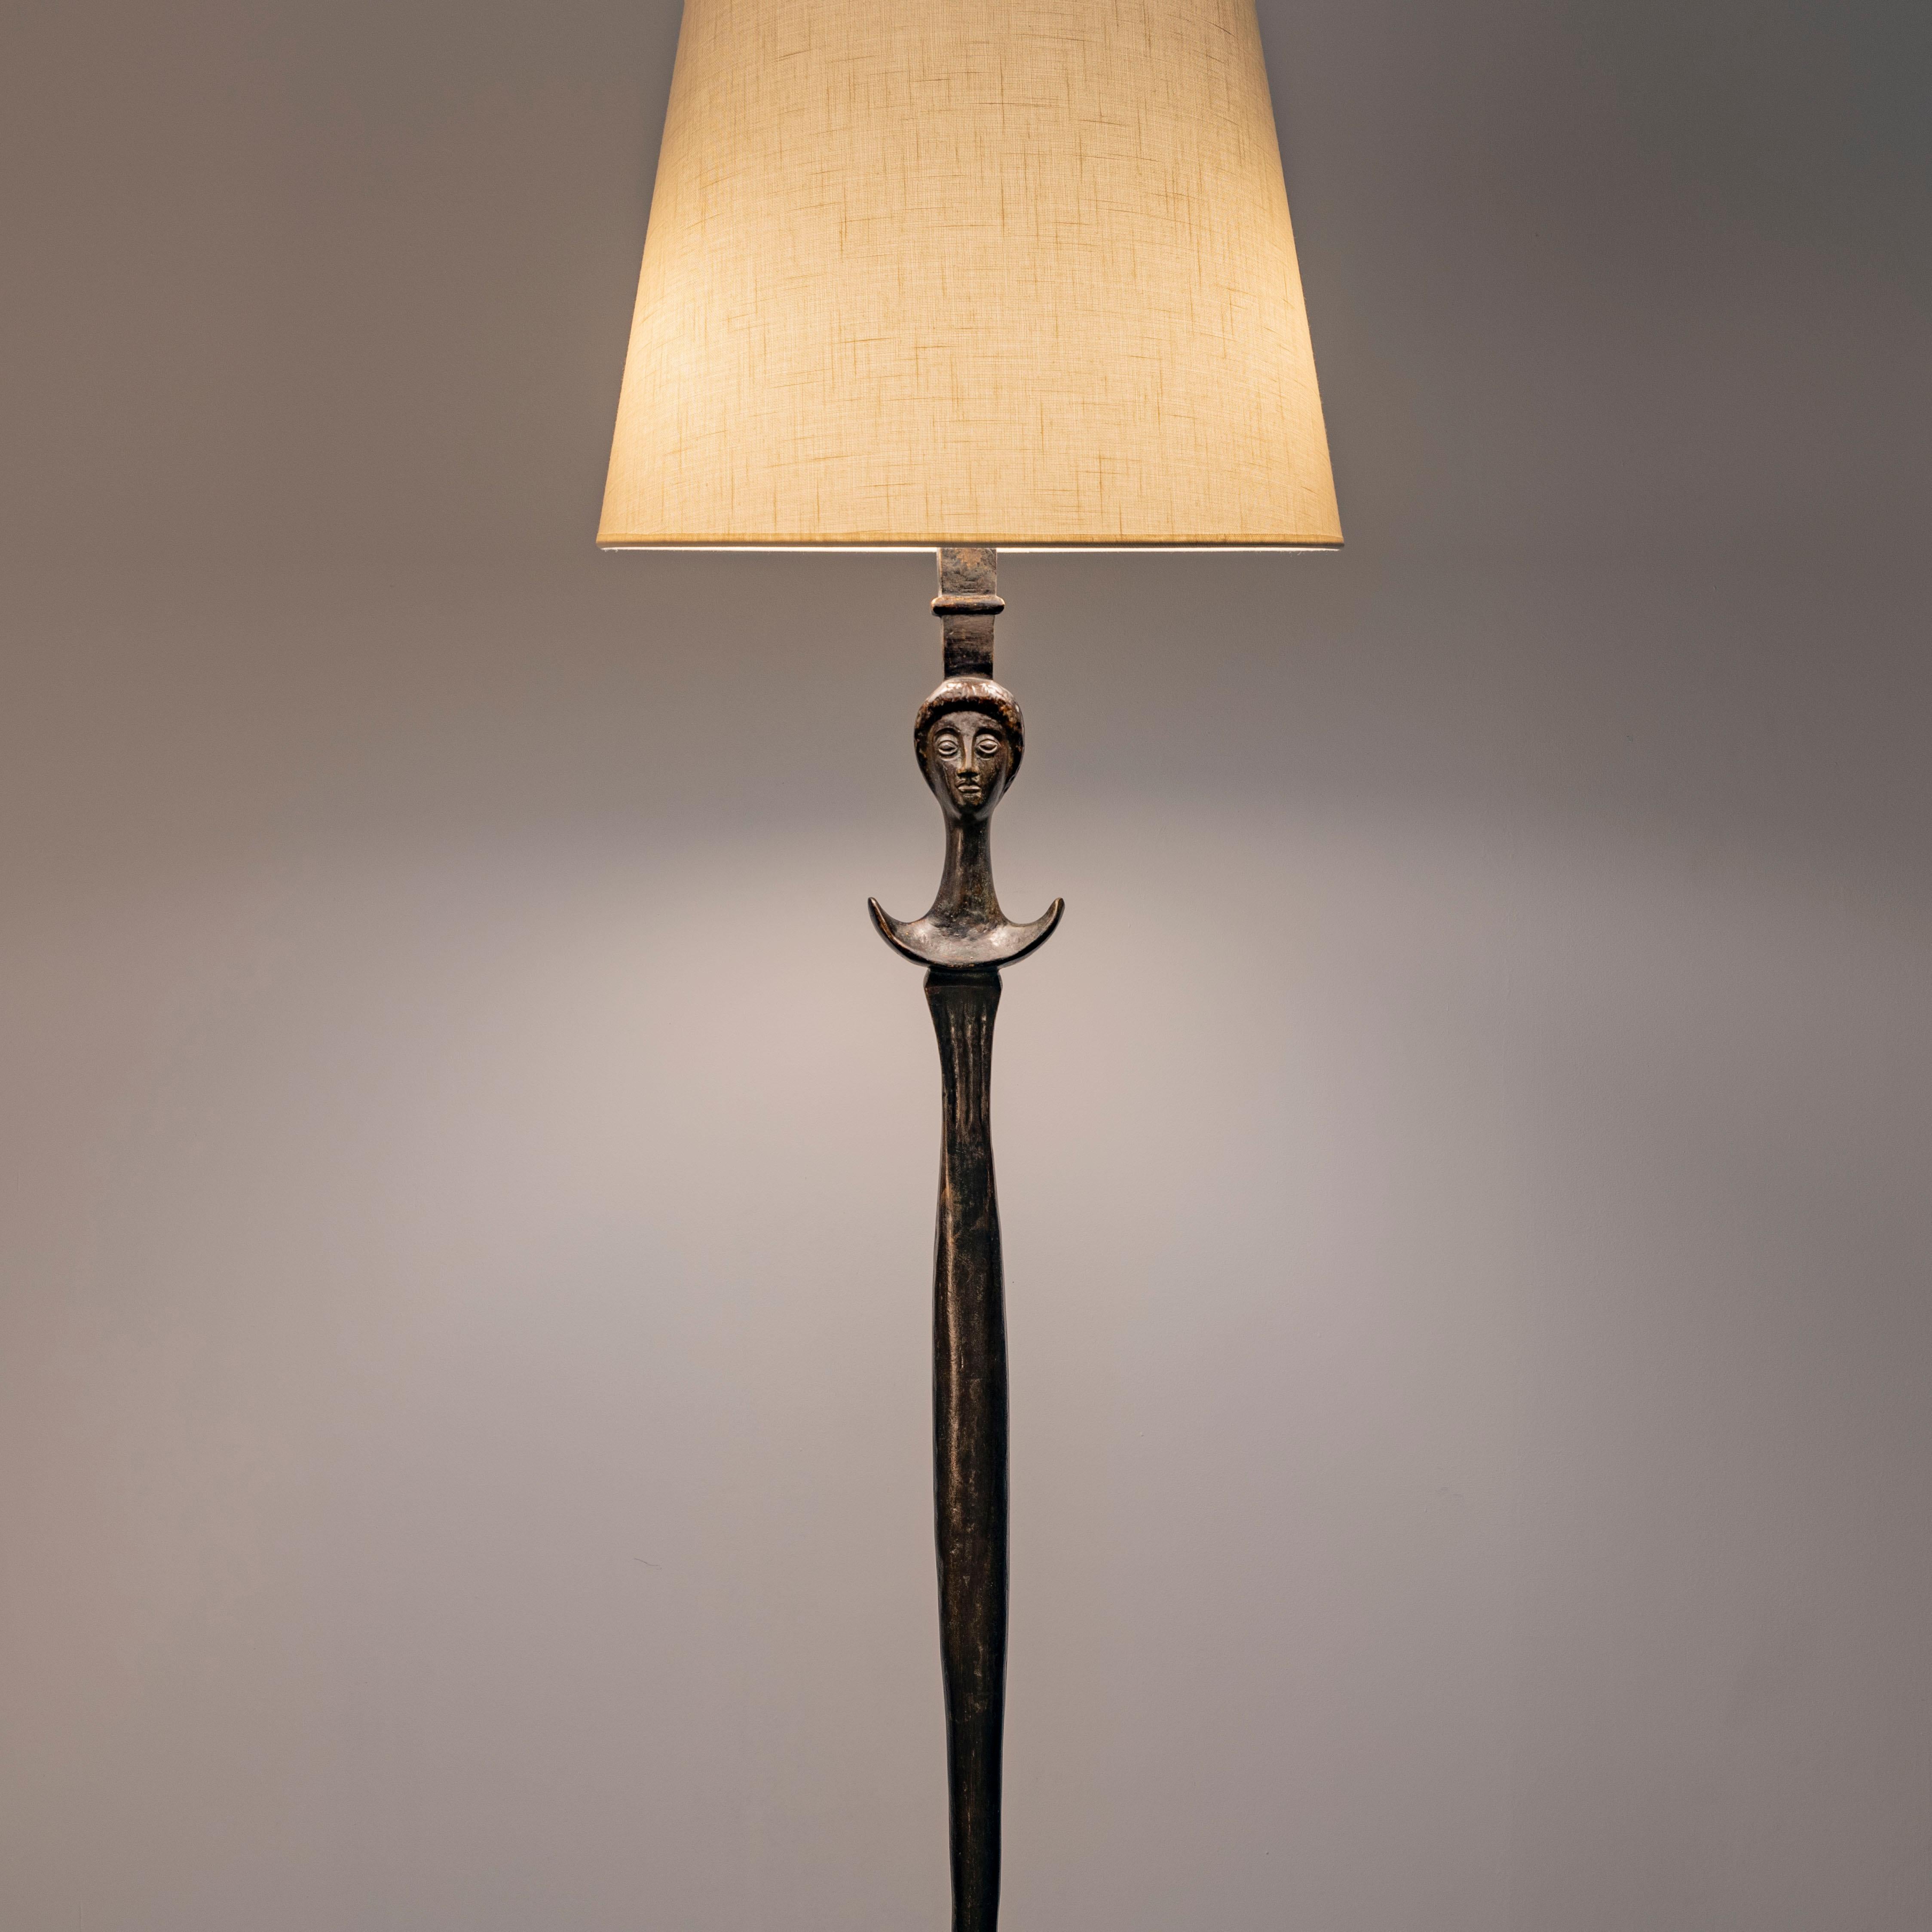 Patinated Tete de femme floor lamp in the style of Alberto Giacometti